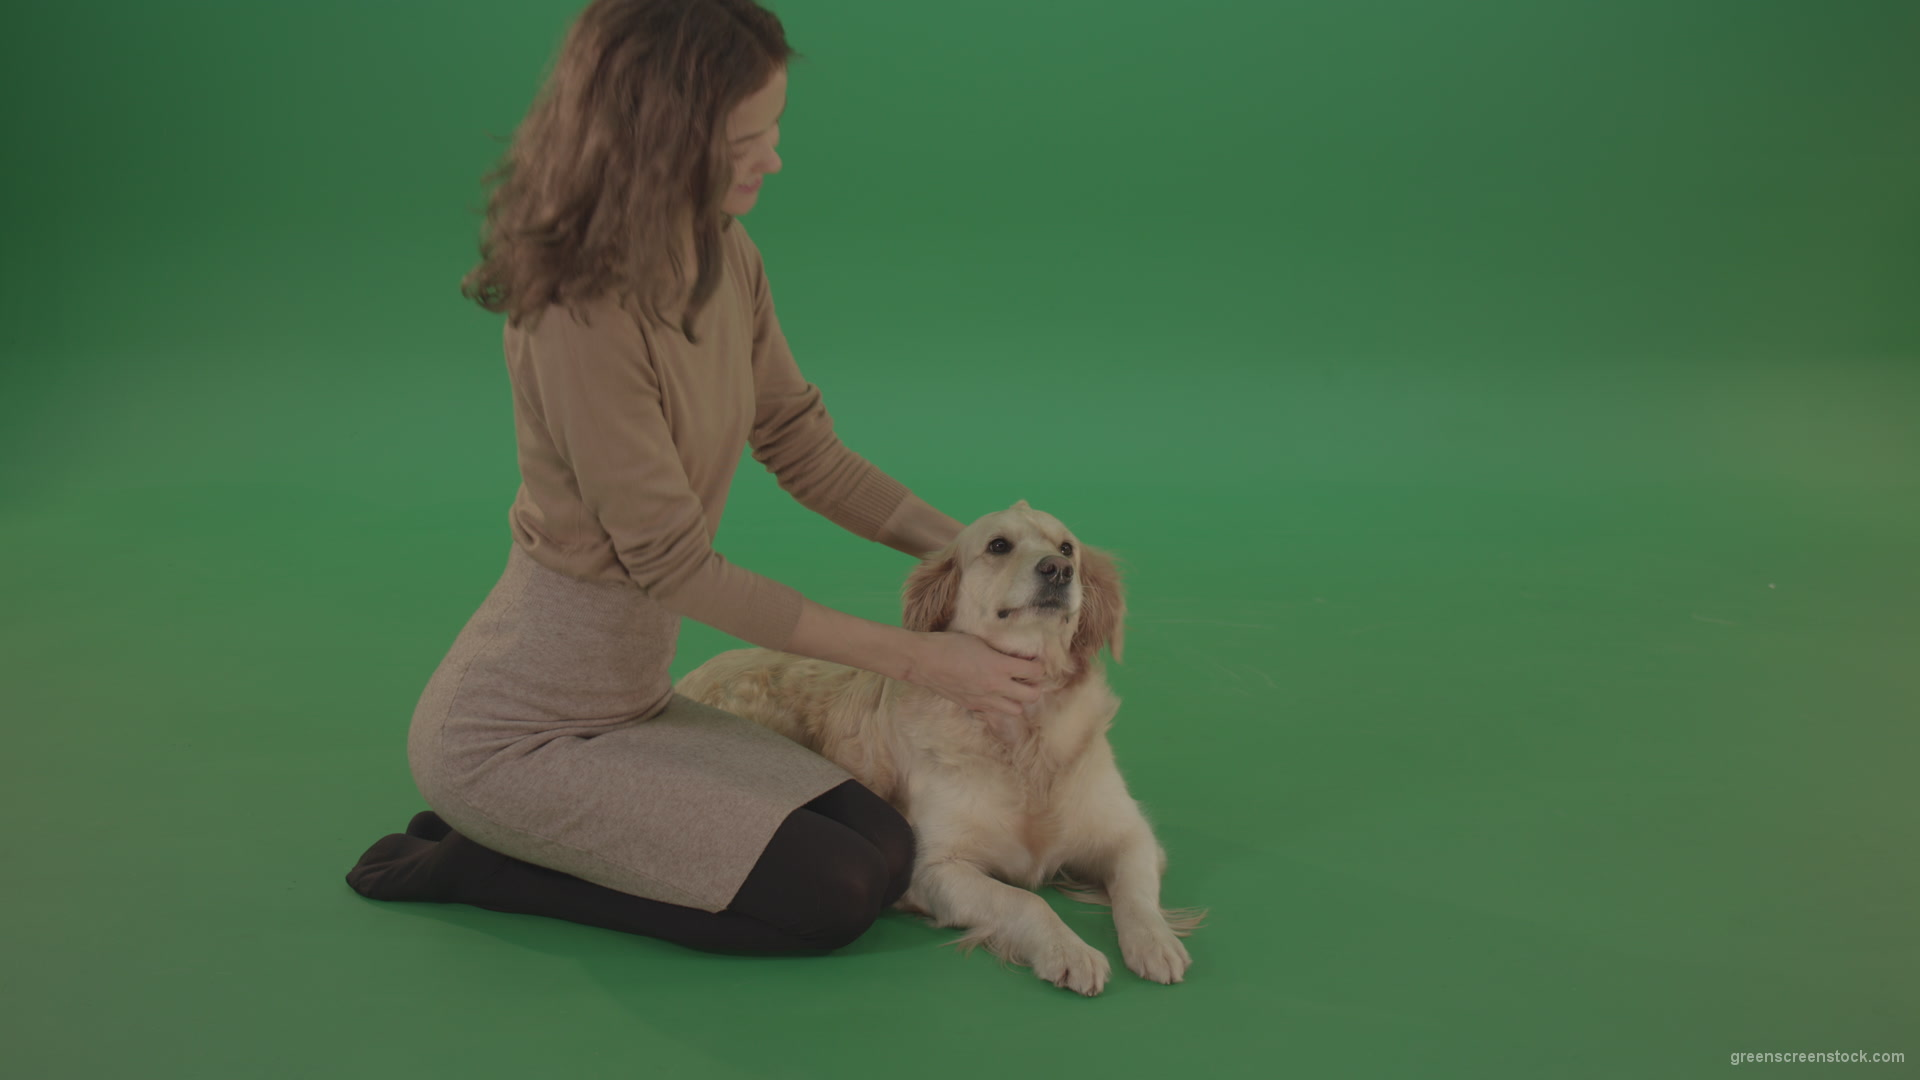 Young-Girl-stroke-the-dog-golden-retriever-big-puppy-isolated-on-green-screen-background_001 Green Screen Stock